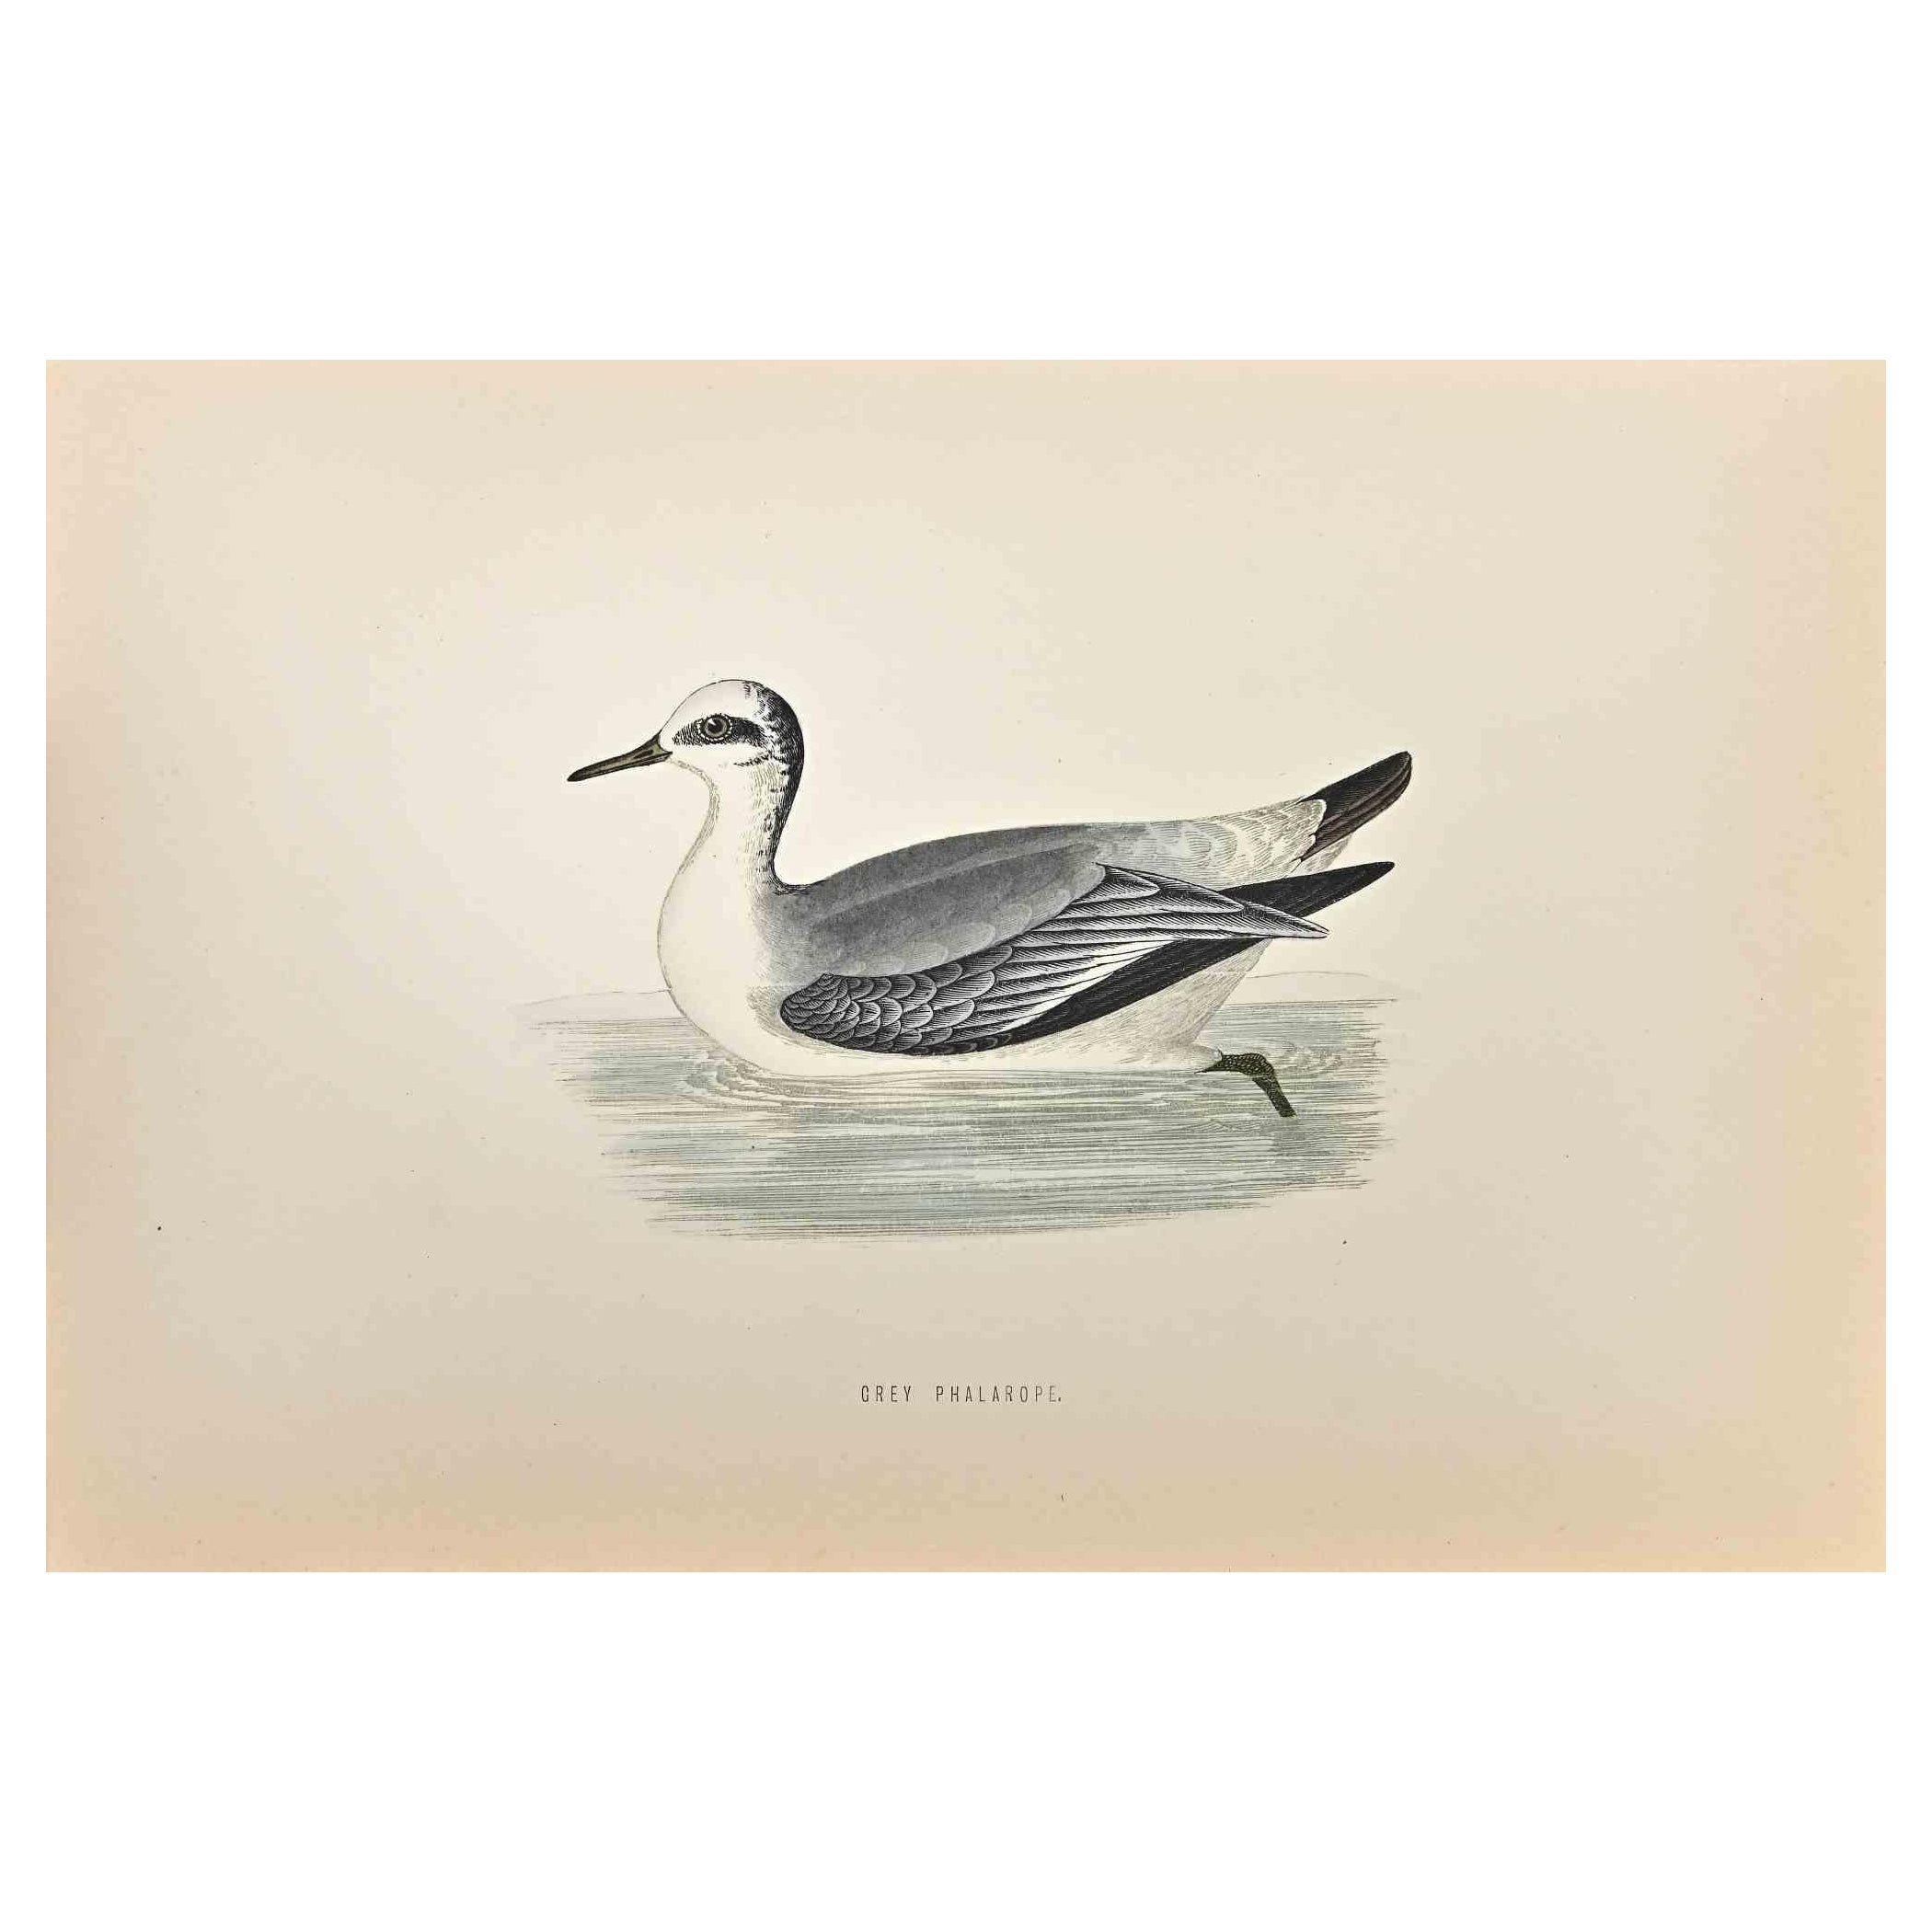 Grey Phalarope is a modern artwork realized in 1870 by the British artist Alexander Francis Lydon (1836-1917). 

Woodcut print on ivory-colored paper.

Hand-colored, published by London, Bell & Sons, 1870.  

The name of the bird is printed on the